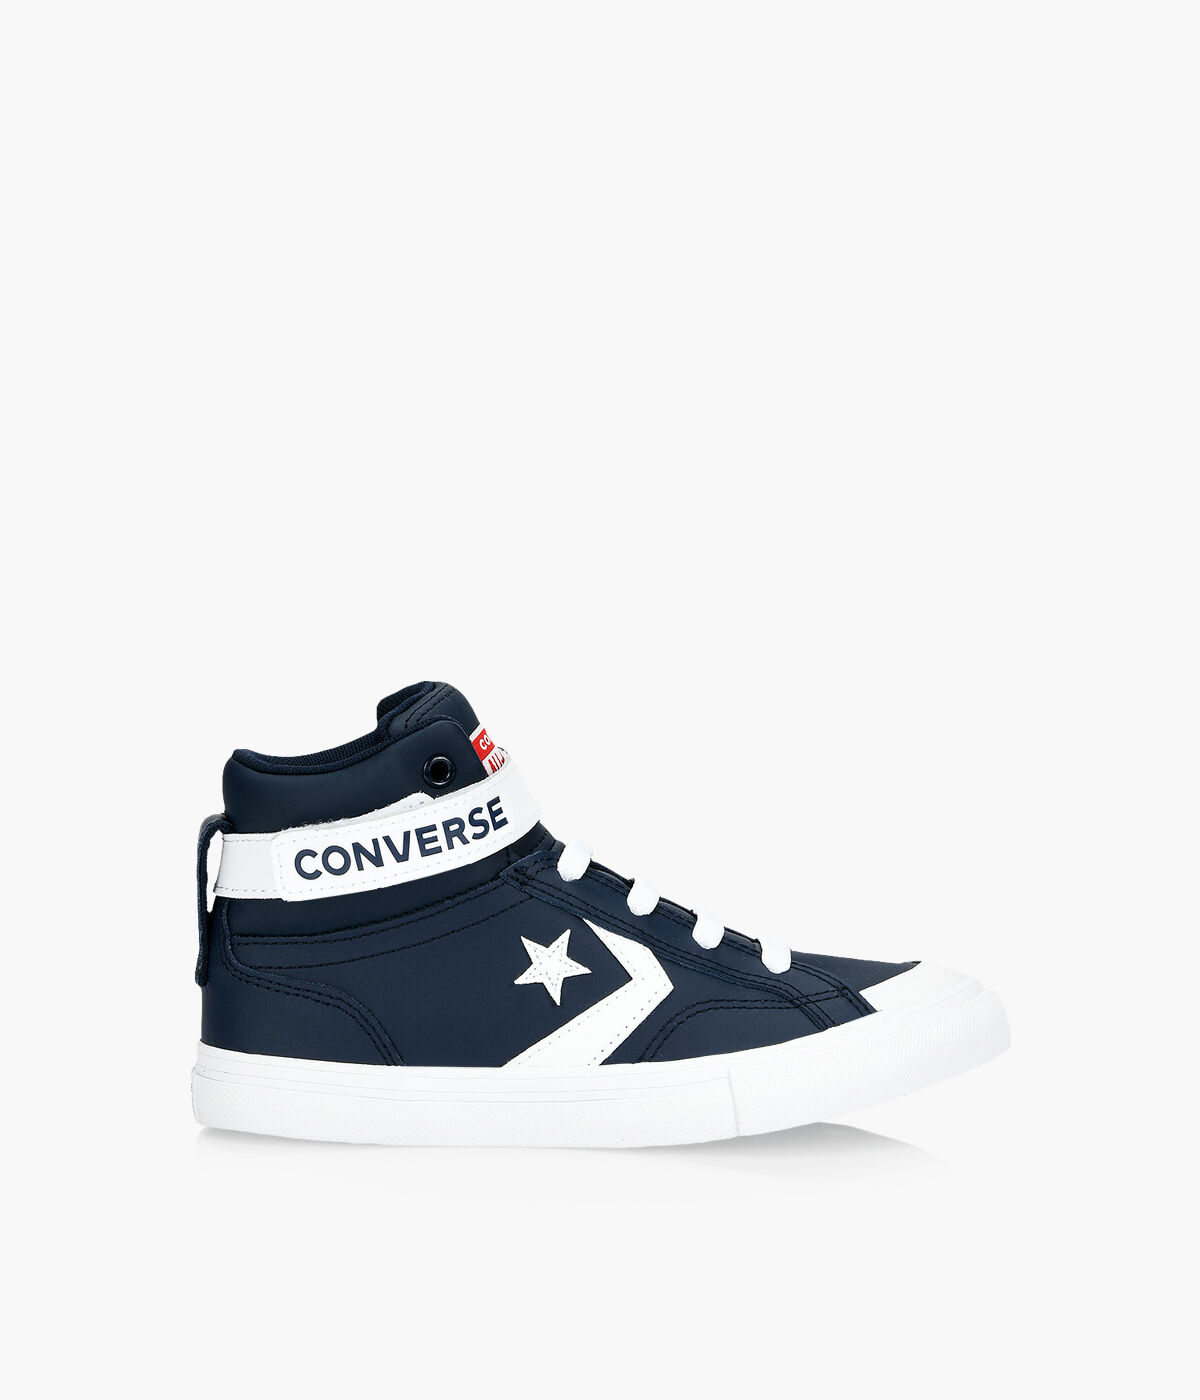 converse strap on shoes